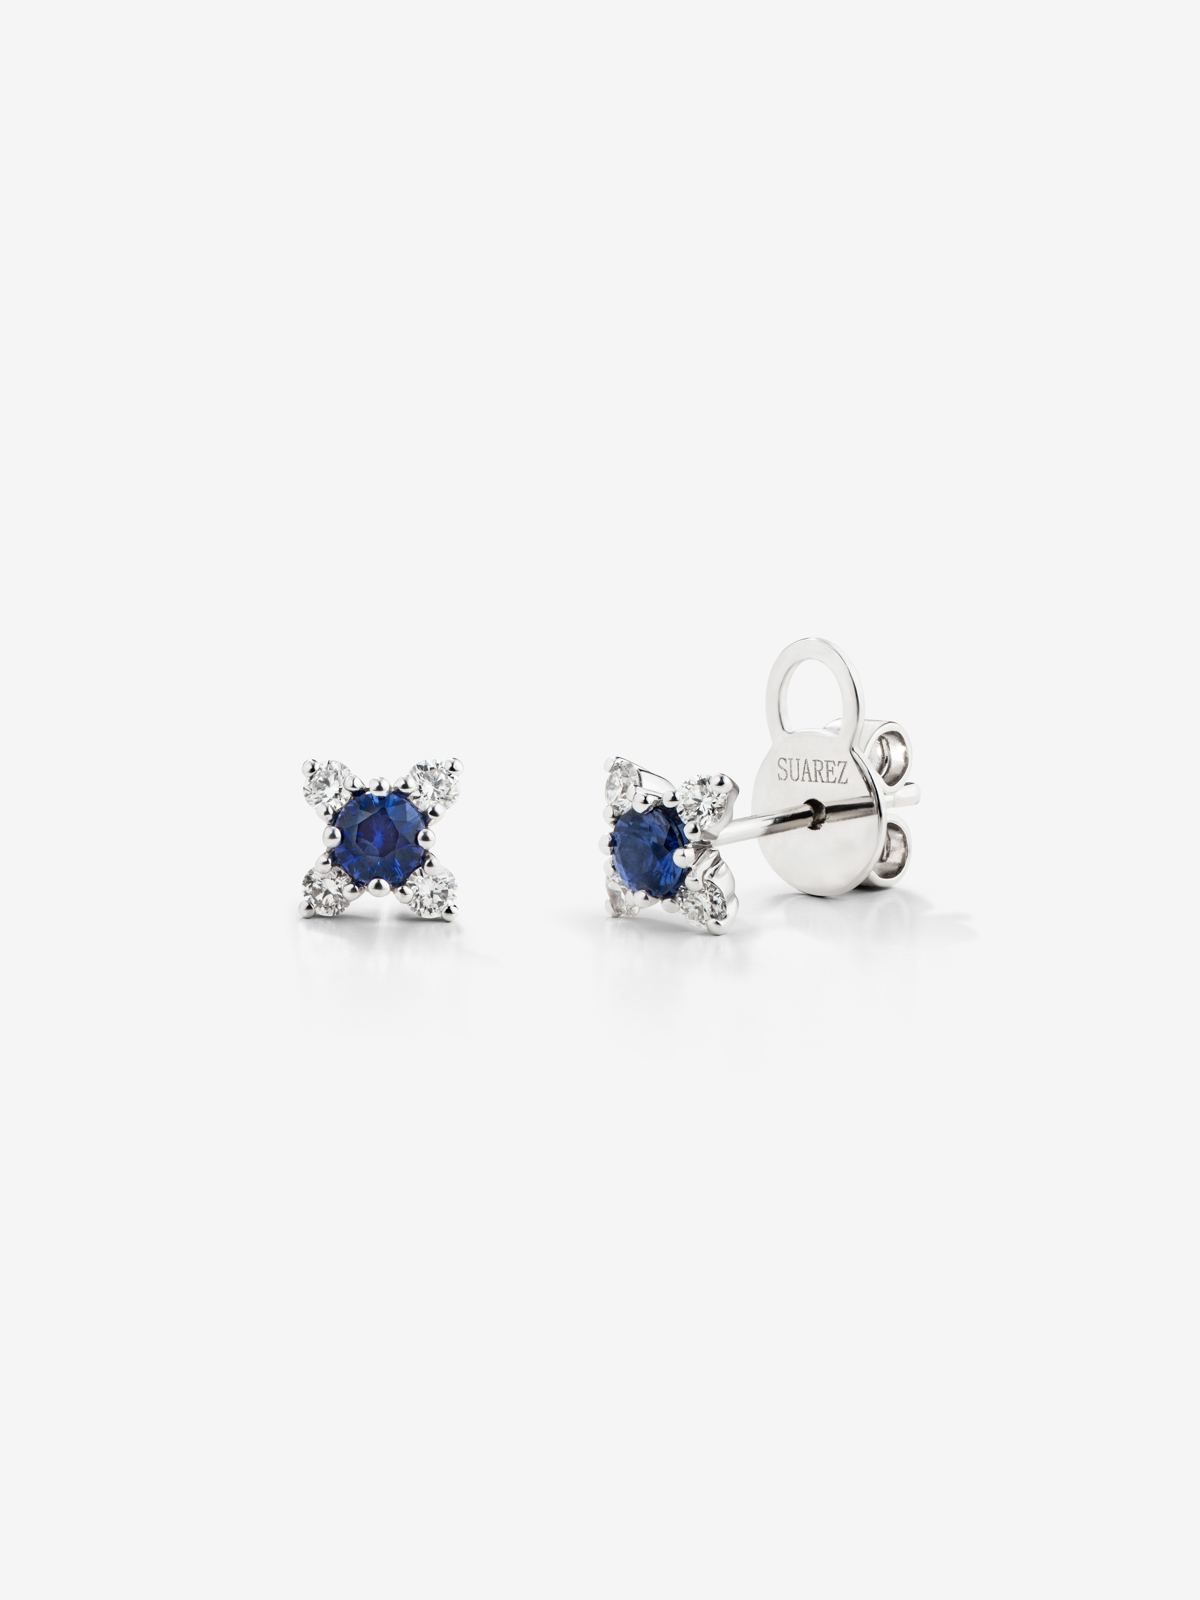 18K white gold flower earrings with sapphire and diamonds.